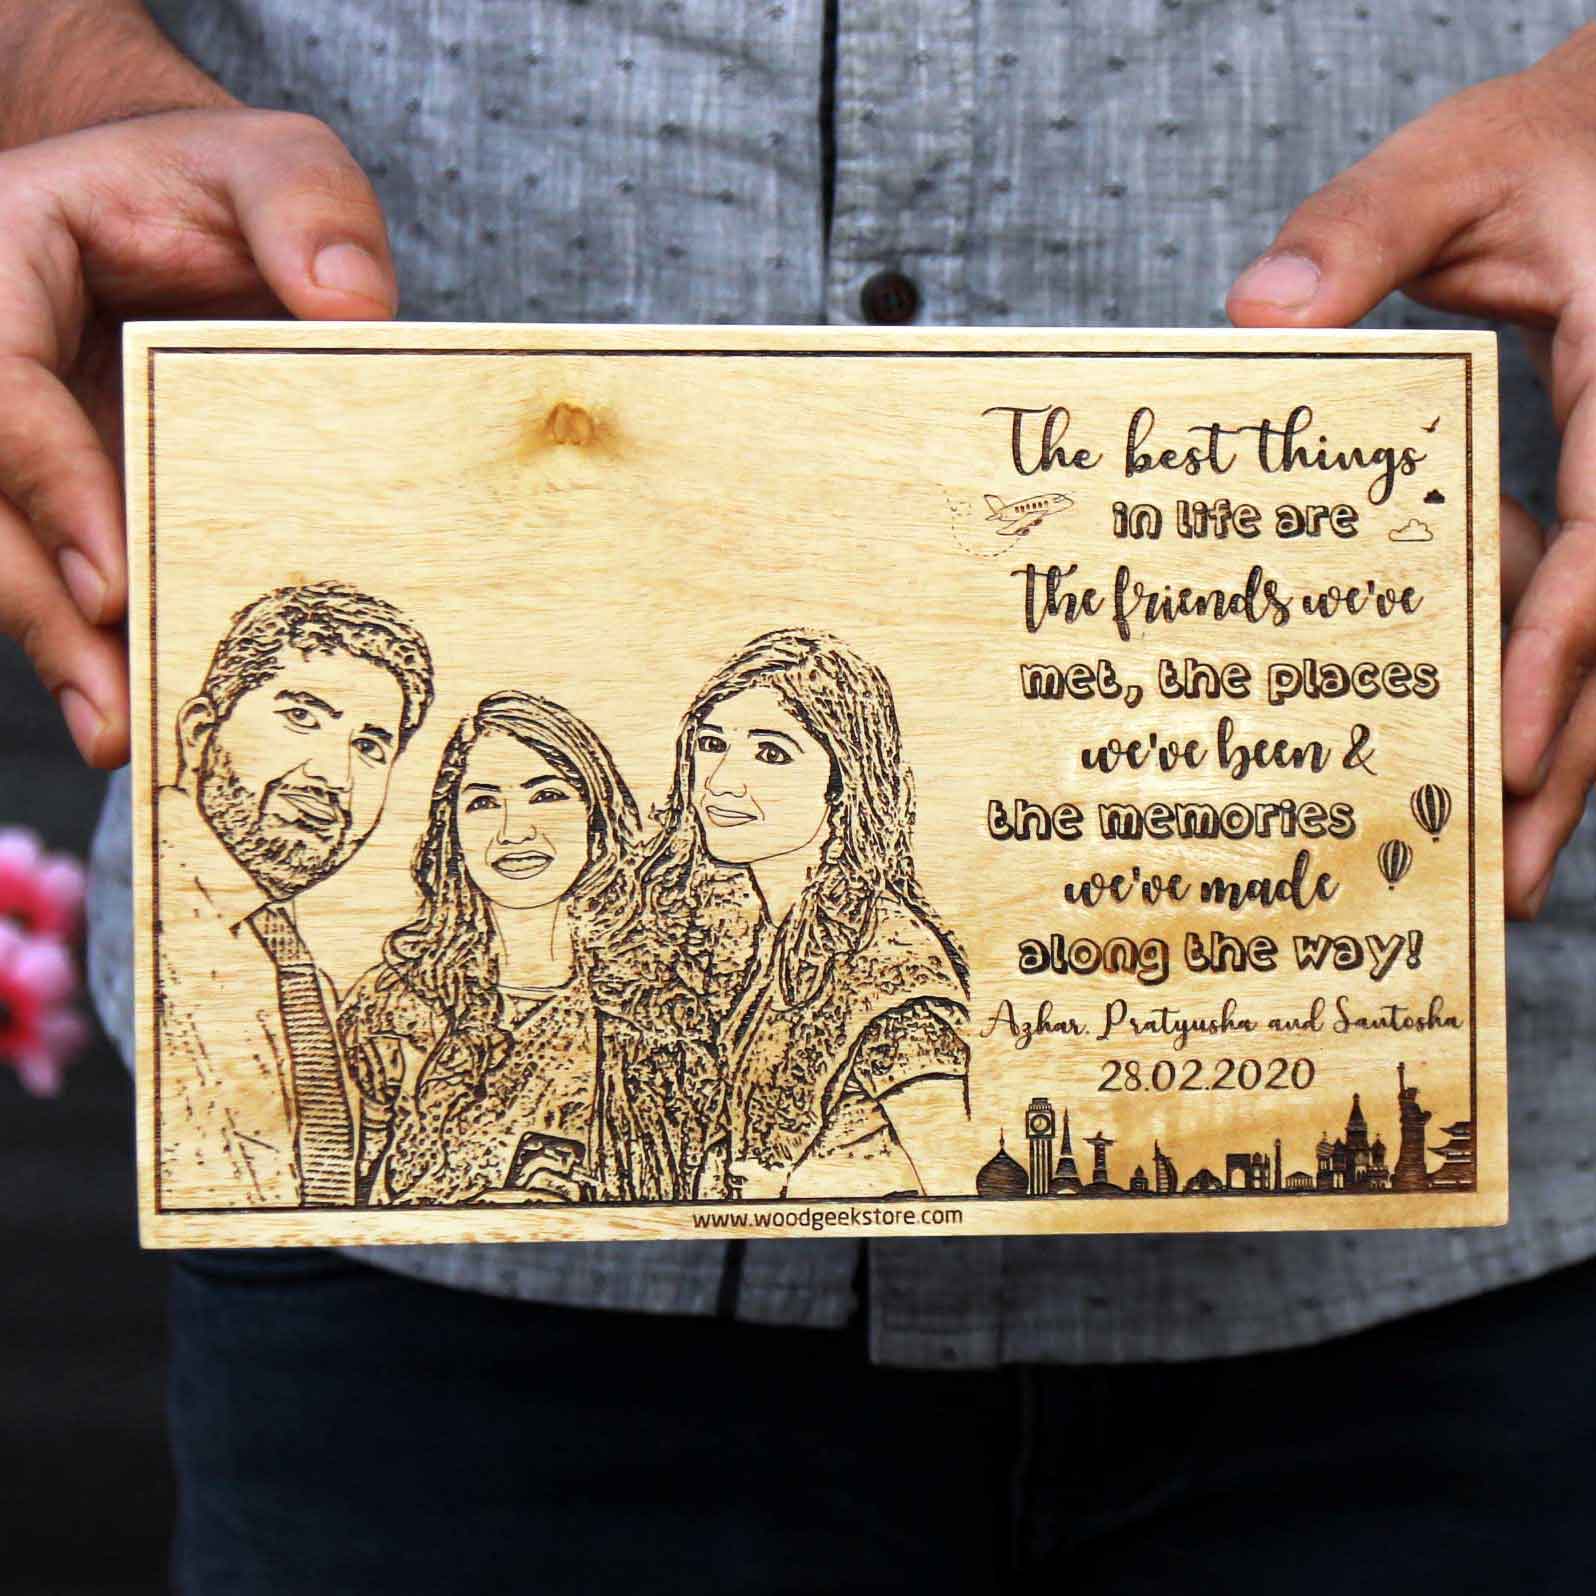 https://www.woodgeekstore.com/cdn/shop/files/the-best-things-in-life-are-the-friends-we-have-personalized-wood-engraved-plaque-for-friends-square_2c0a2f73-a781-409b-9594-aef2054bff57_1600x.jpg?v=1704296653